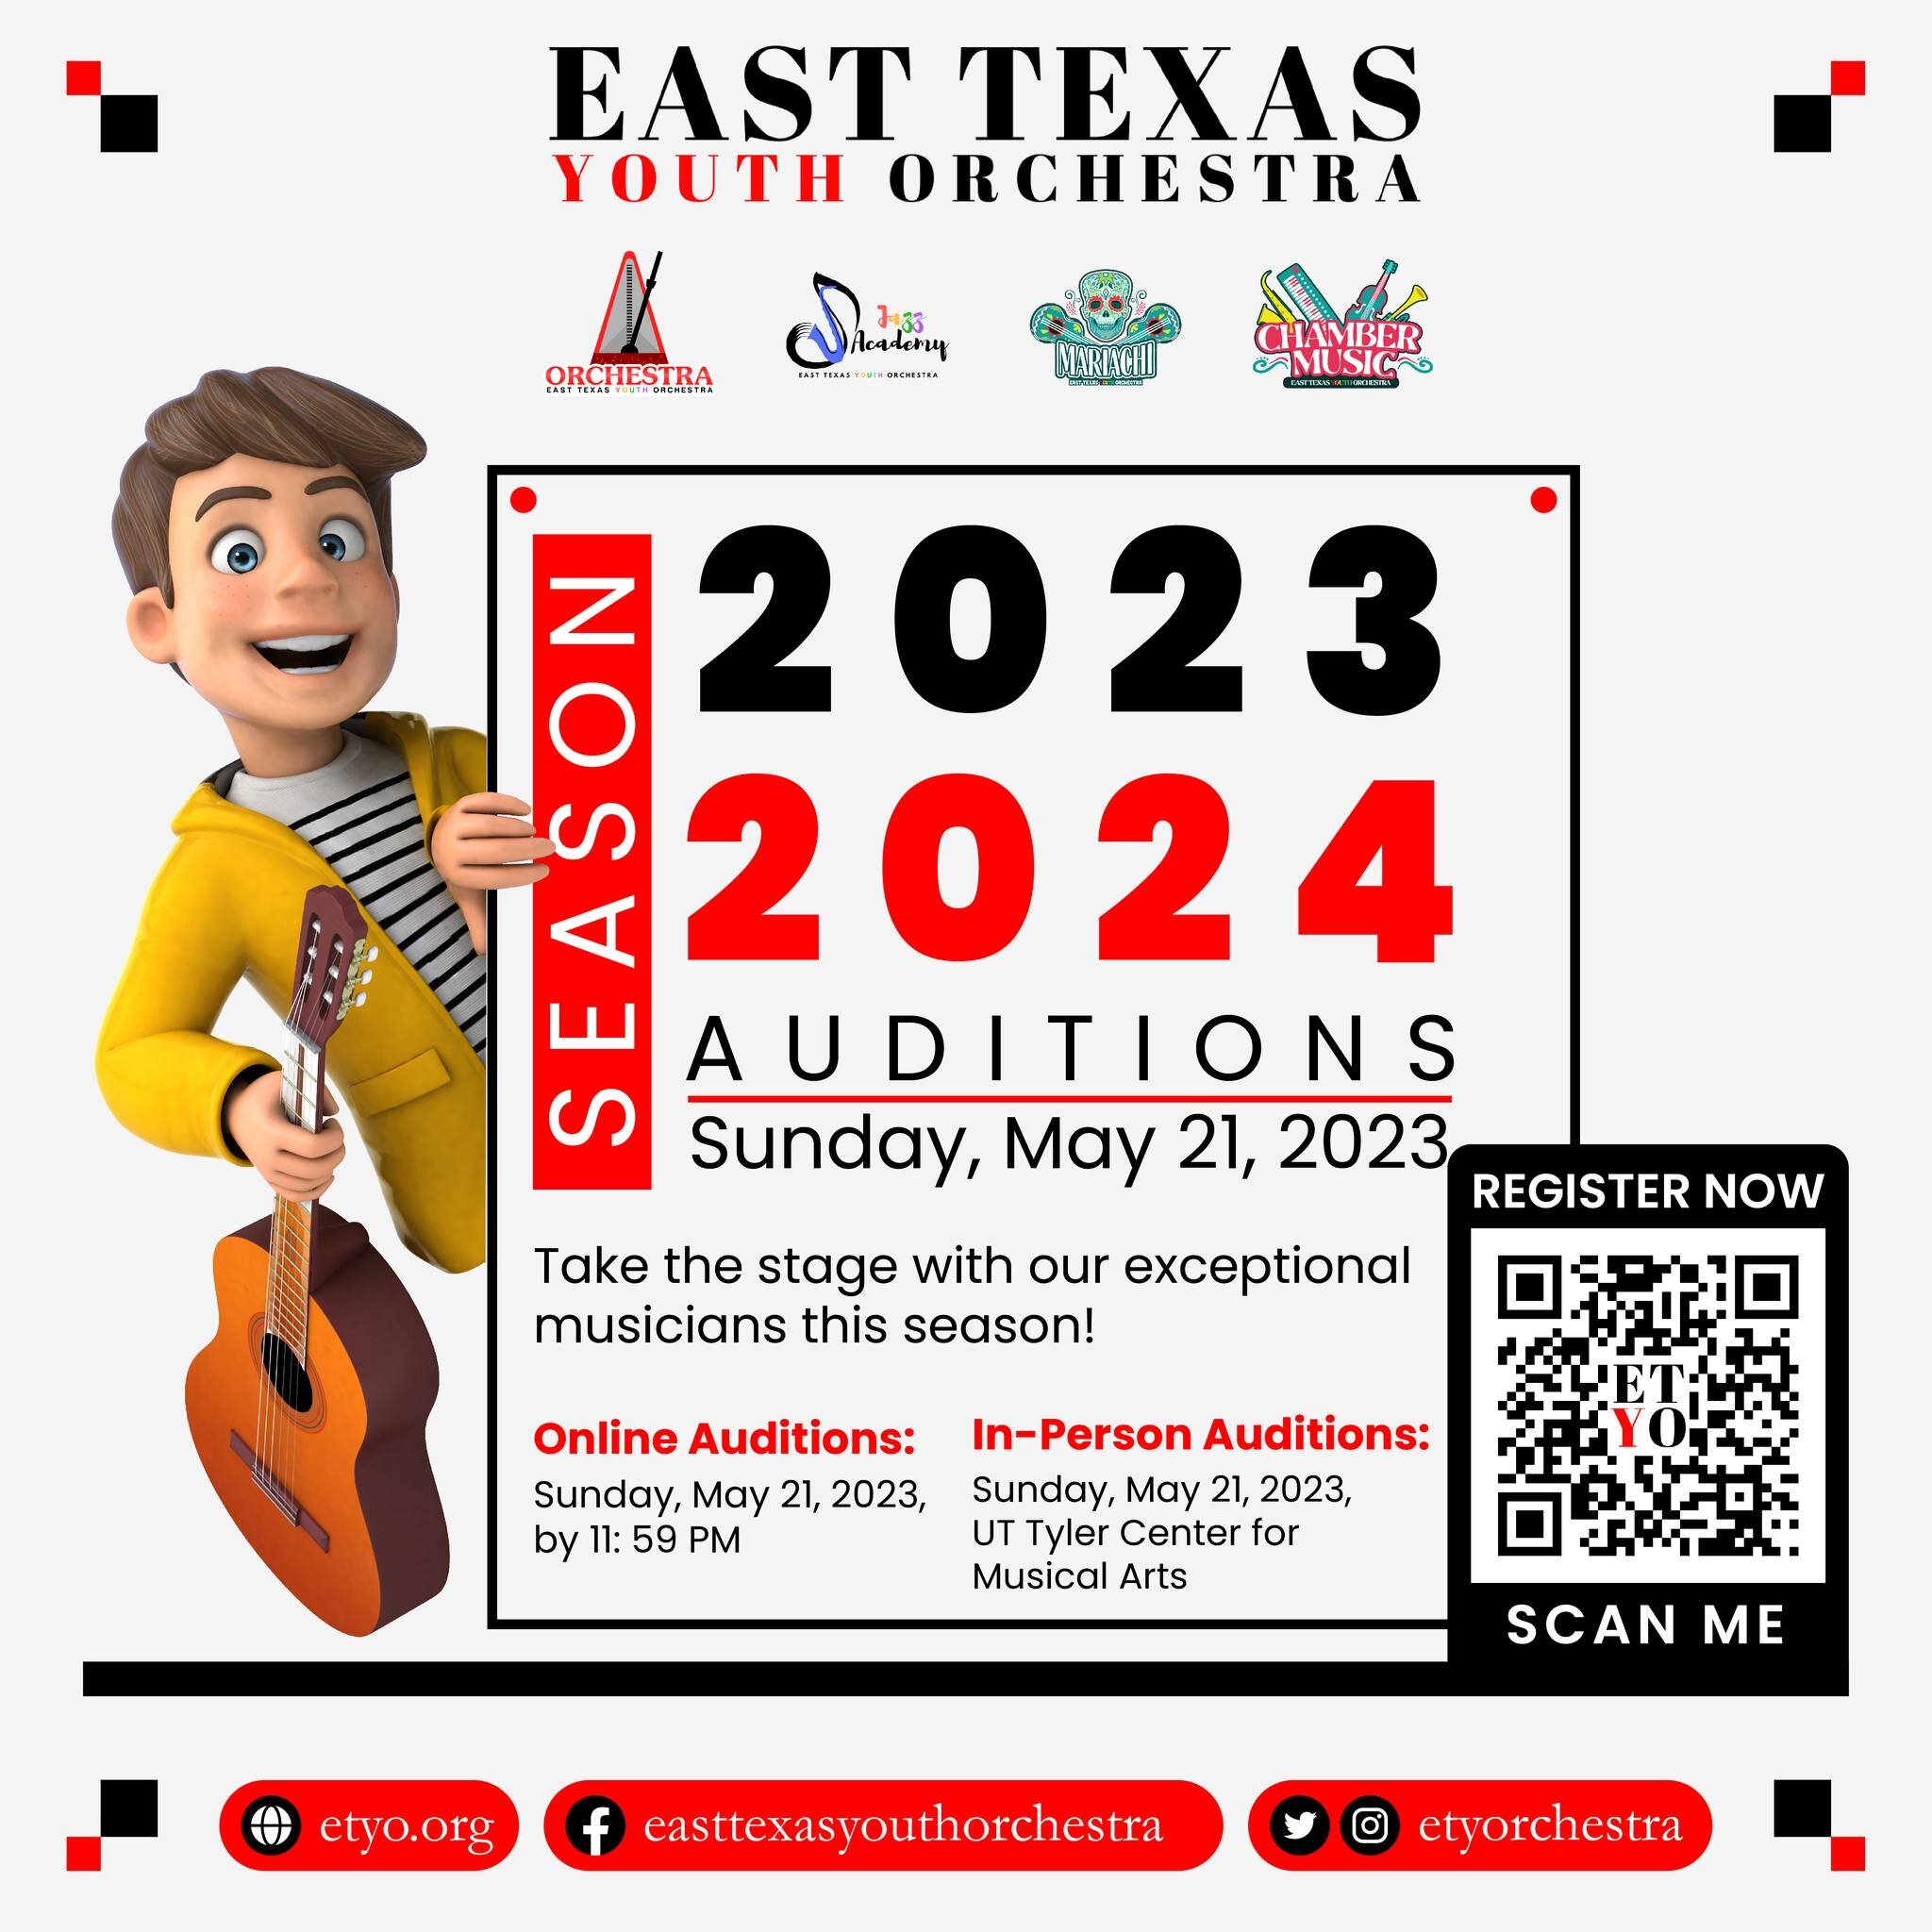 The East Texas Youth Orchestra (ETYO) is inviting young musicians to audition for the 2023-2024 season! Auditions will be held on Sunday, May 21, 2023, at the UT Tyler Center for Musical Arts starting at 2 PM.

The ETYO is a non-profit organization t